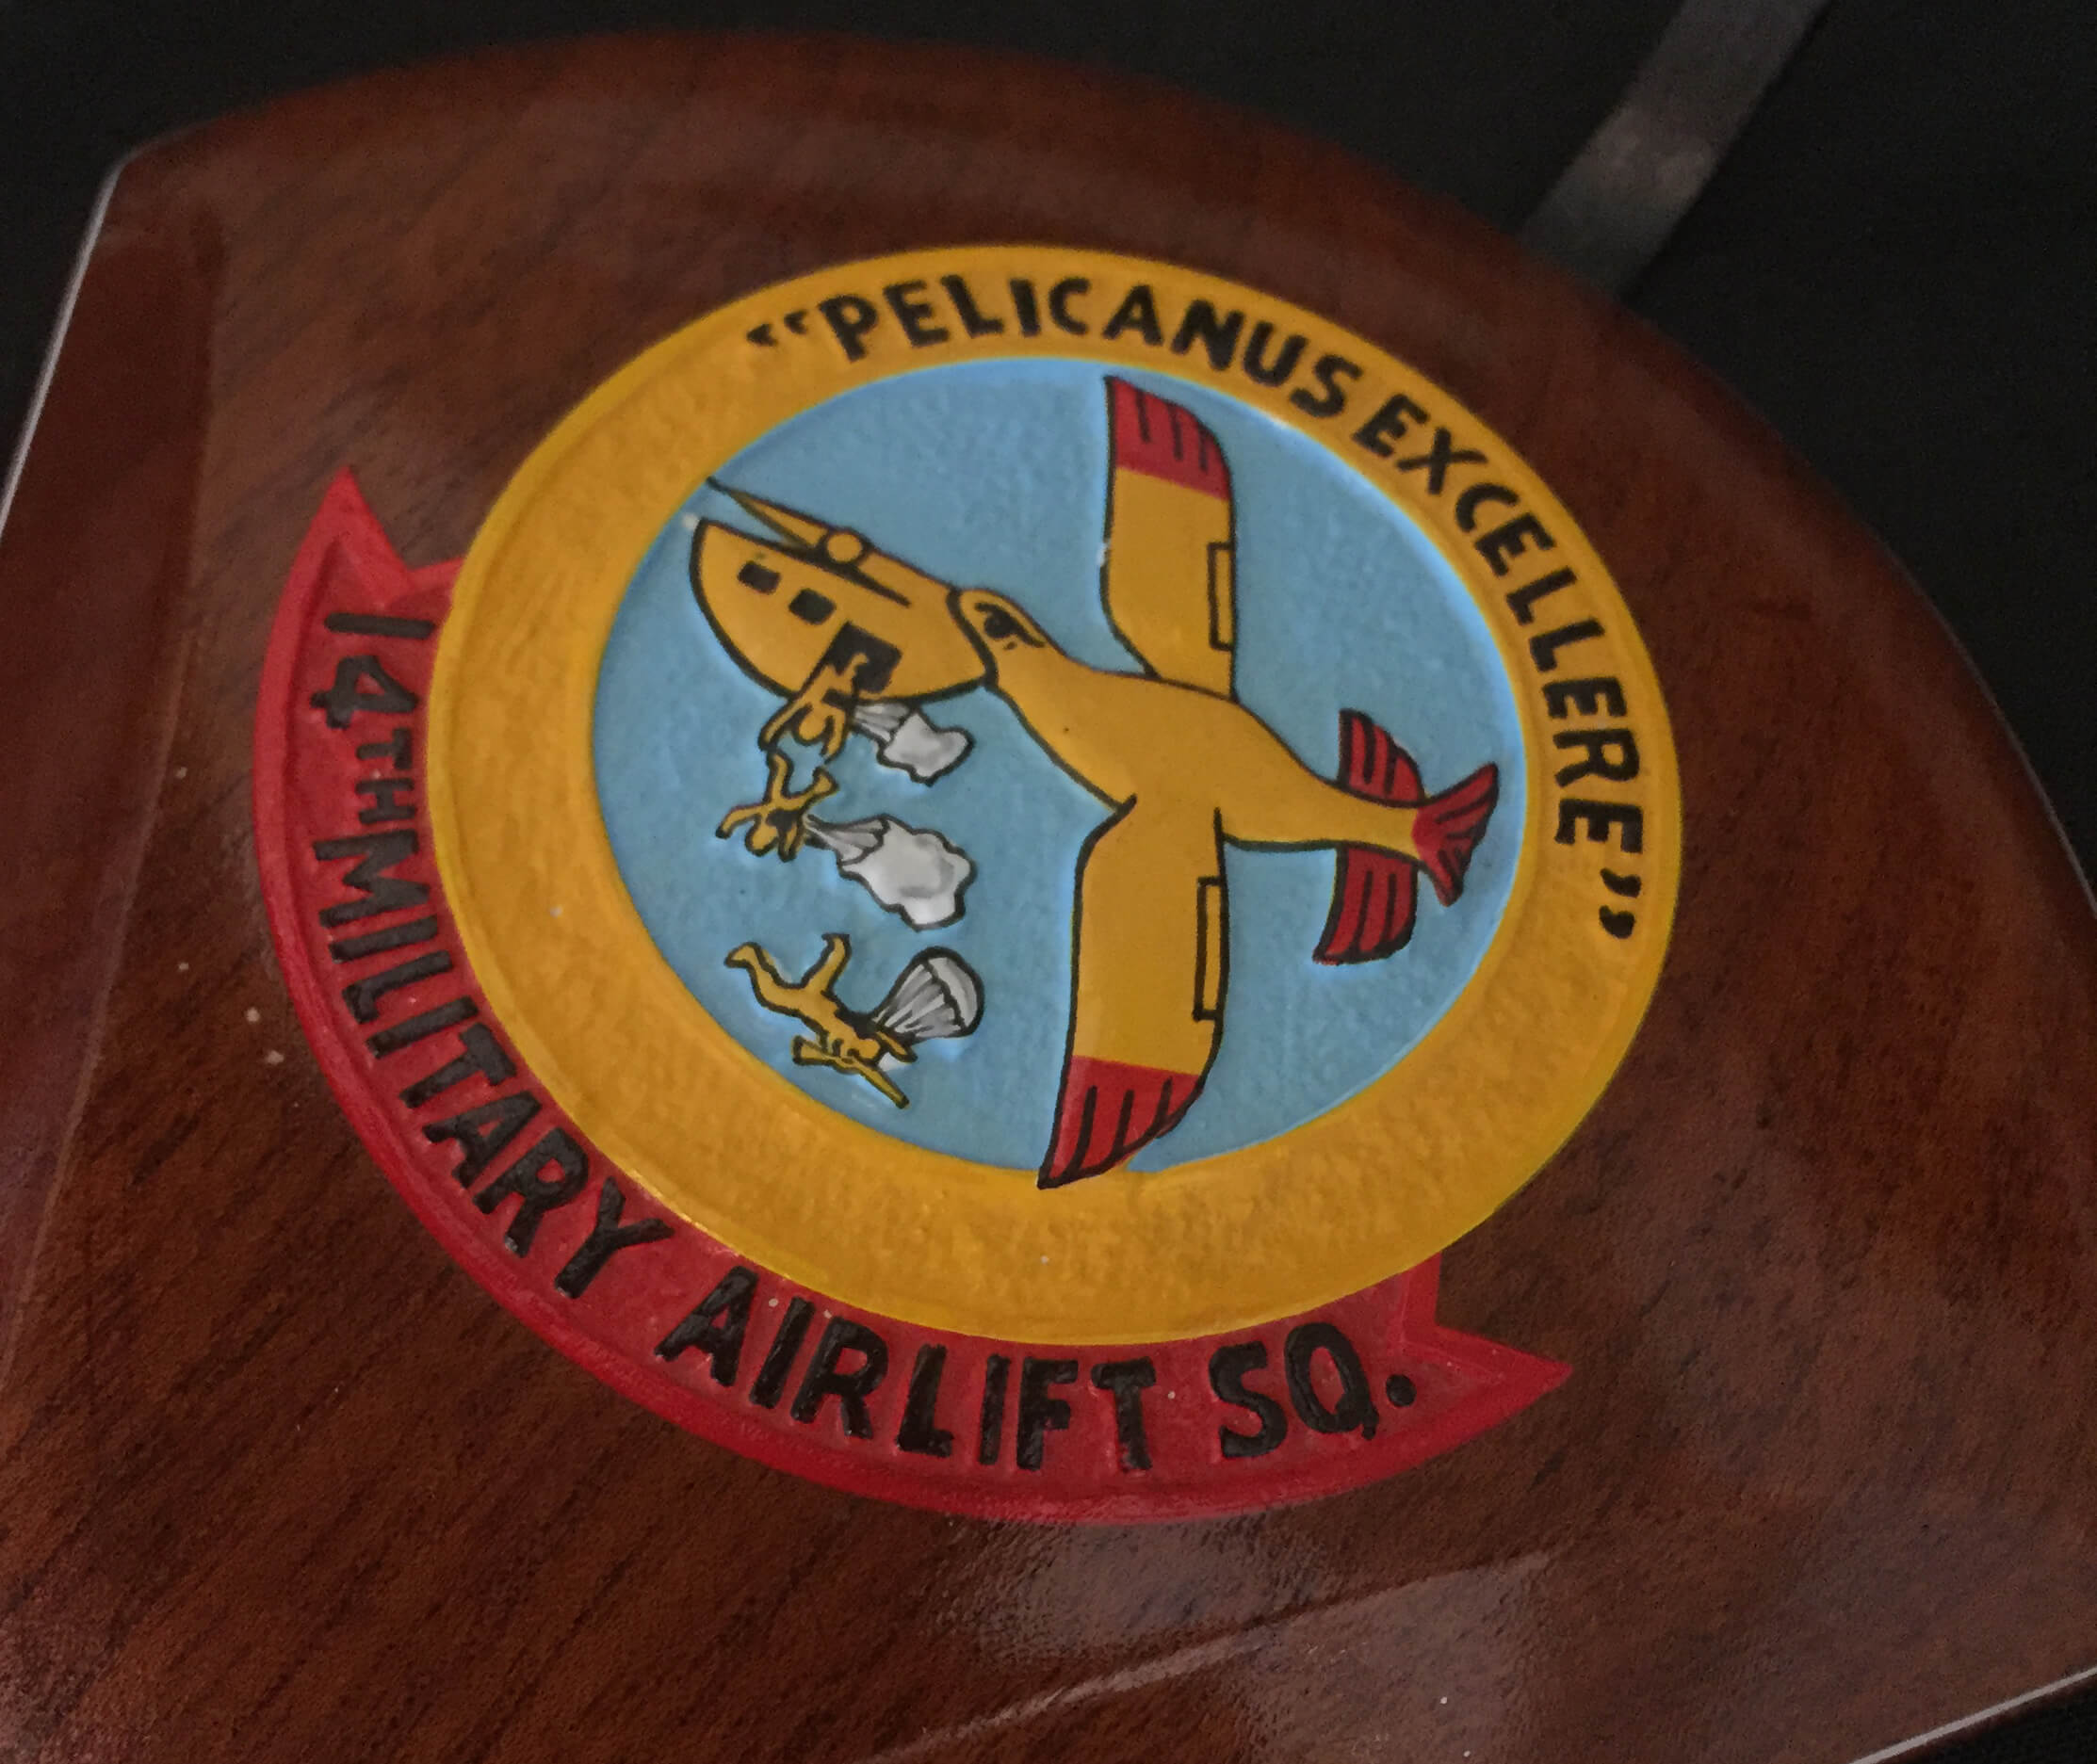 Carved insignia of a military squadron.